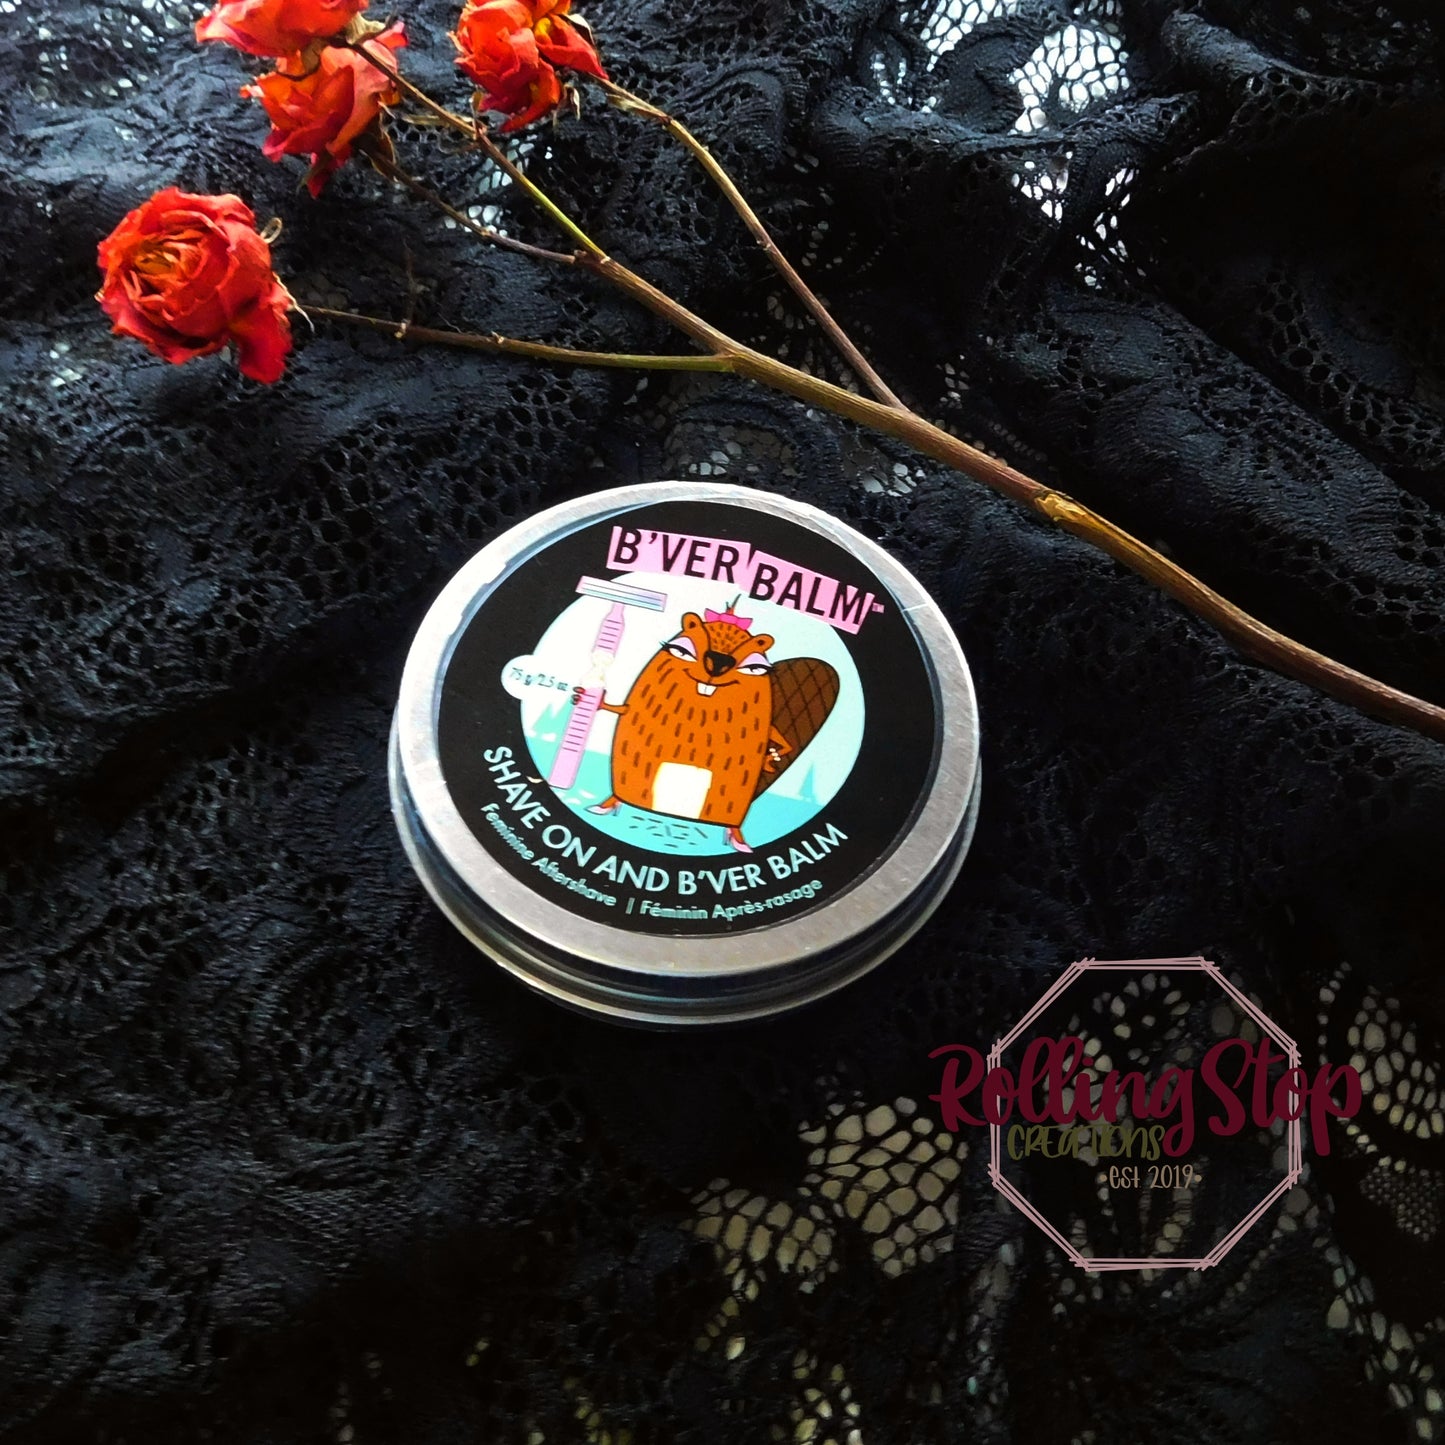 B'ver Balm by Walton Wood Farm Corp. sold by Rolling Stop Creations Boutique - Event - Faire - Gift - Skincare